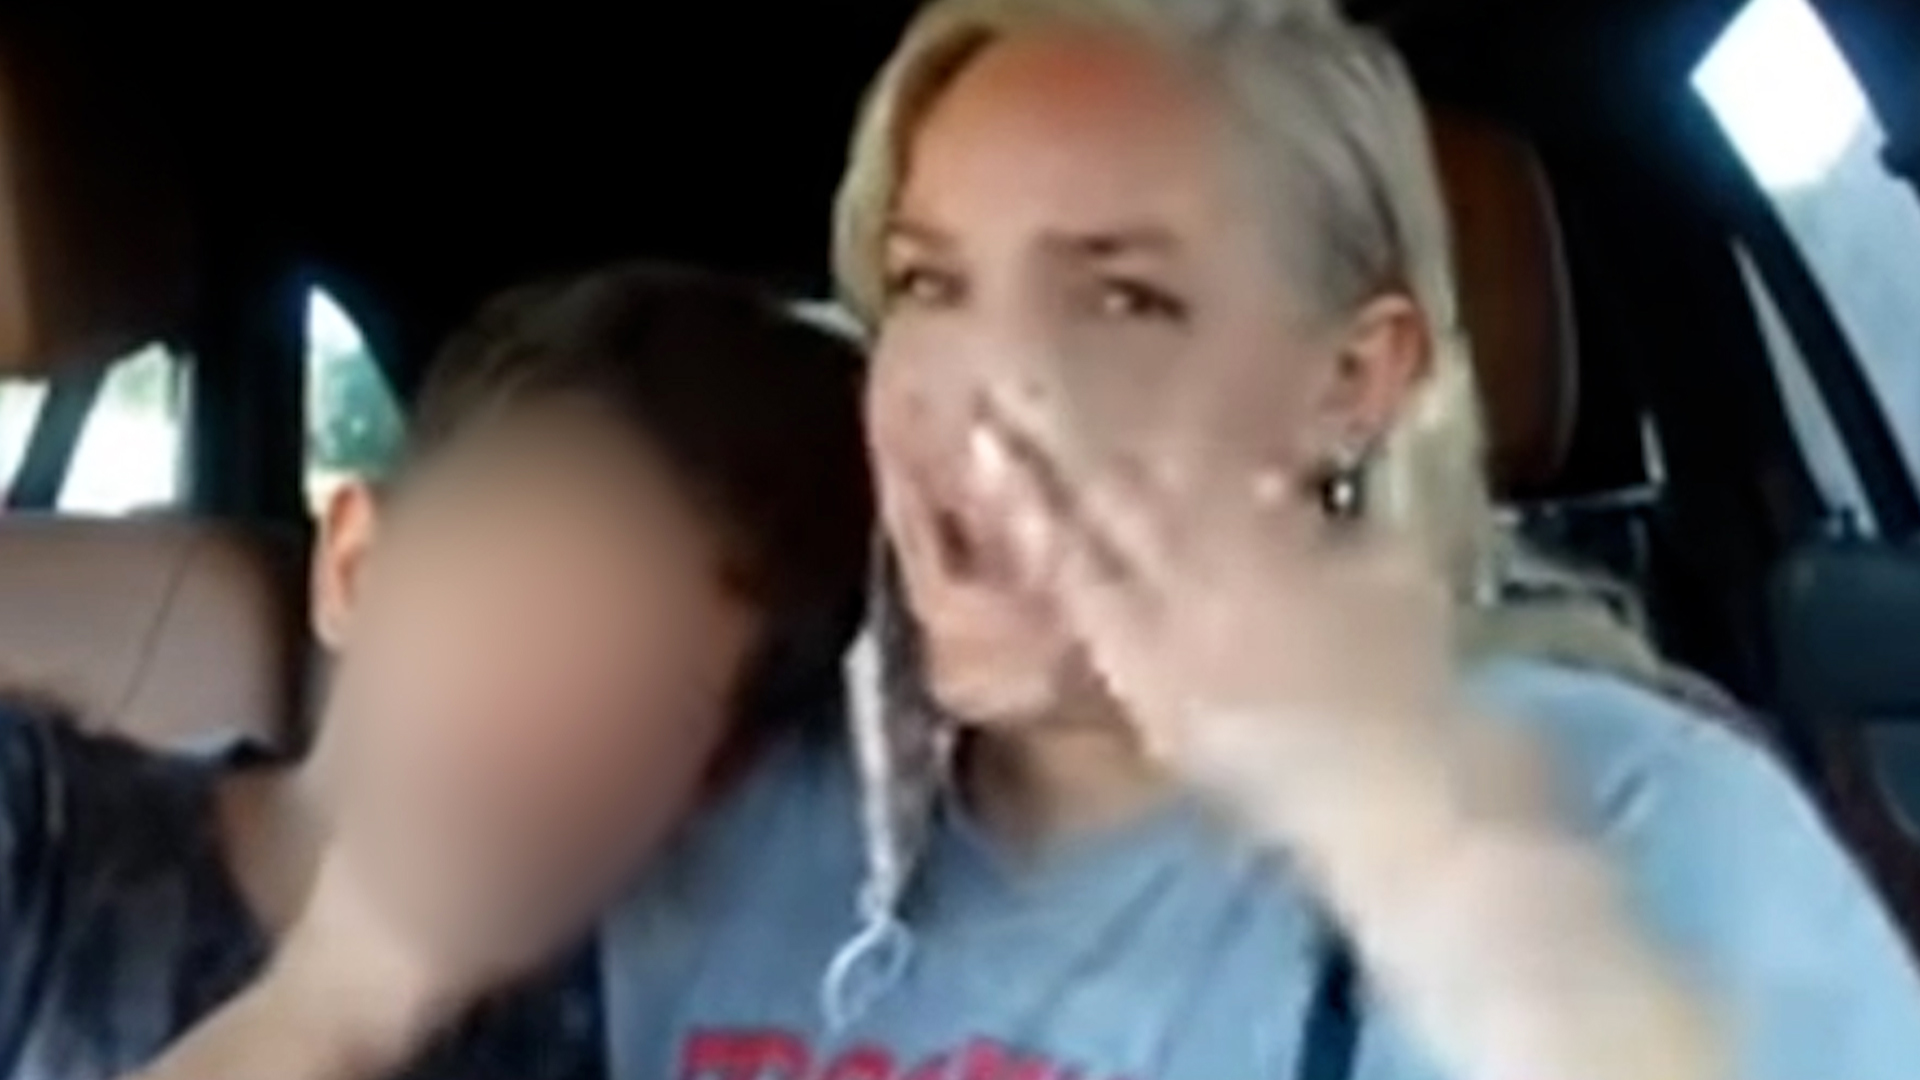 YouTube mom deletes channel after criticism of video with son crying